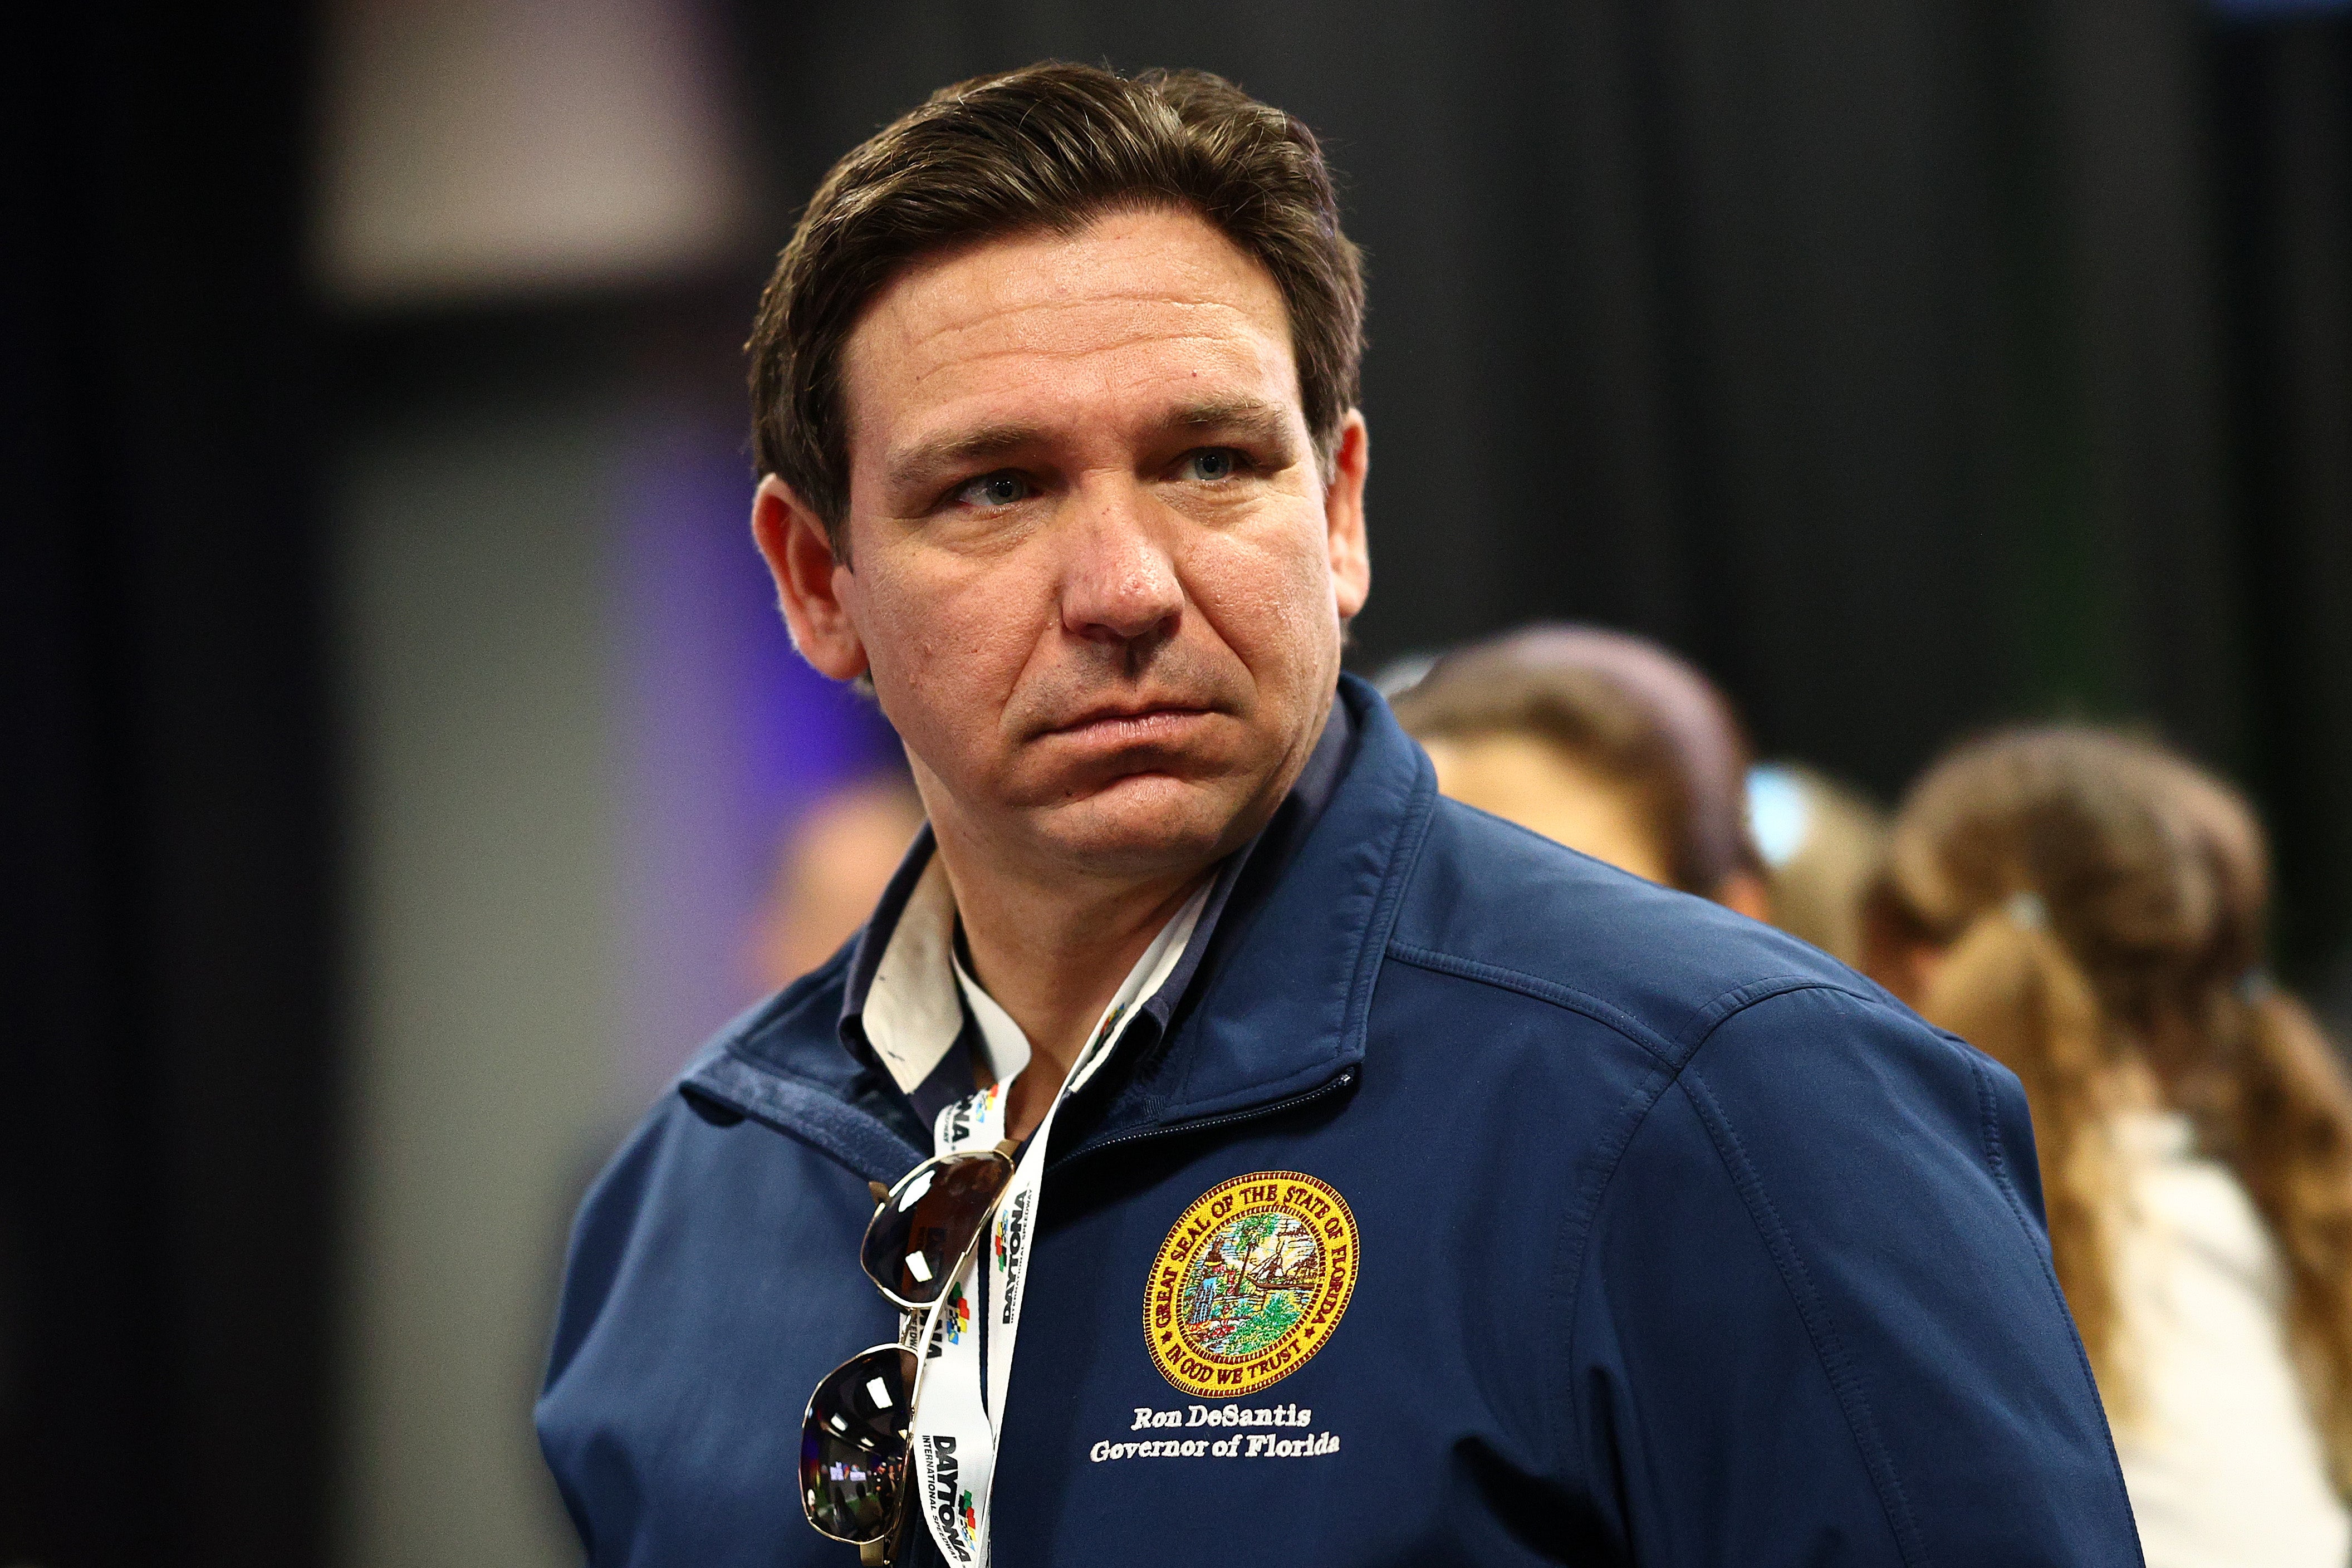 Ron DeSantis, pictured, signed a series of bills that repeal climate change policies and remove climate references from state law. A local meteorologist has pushed back